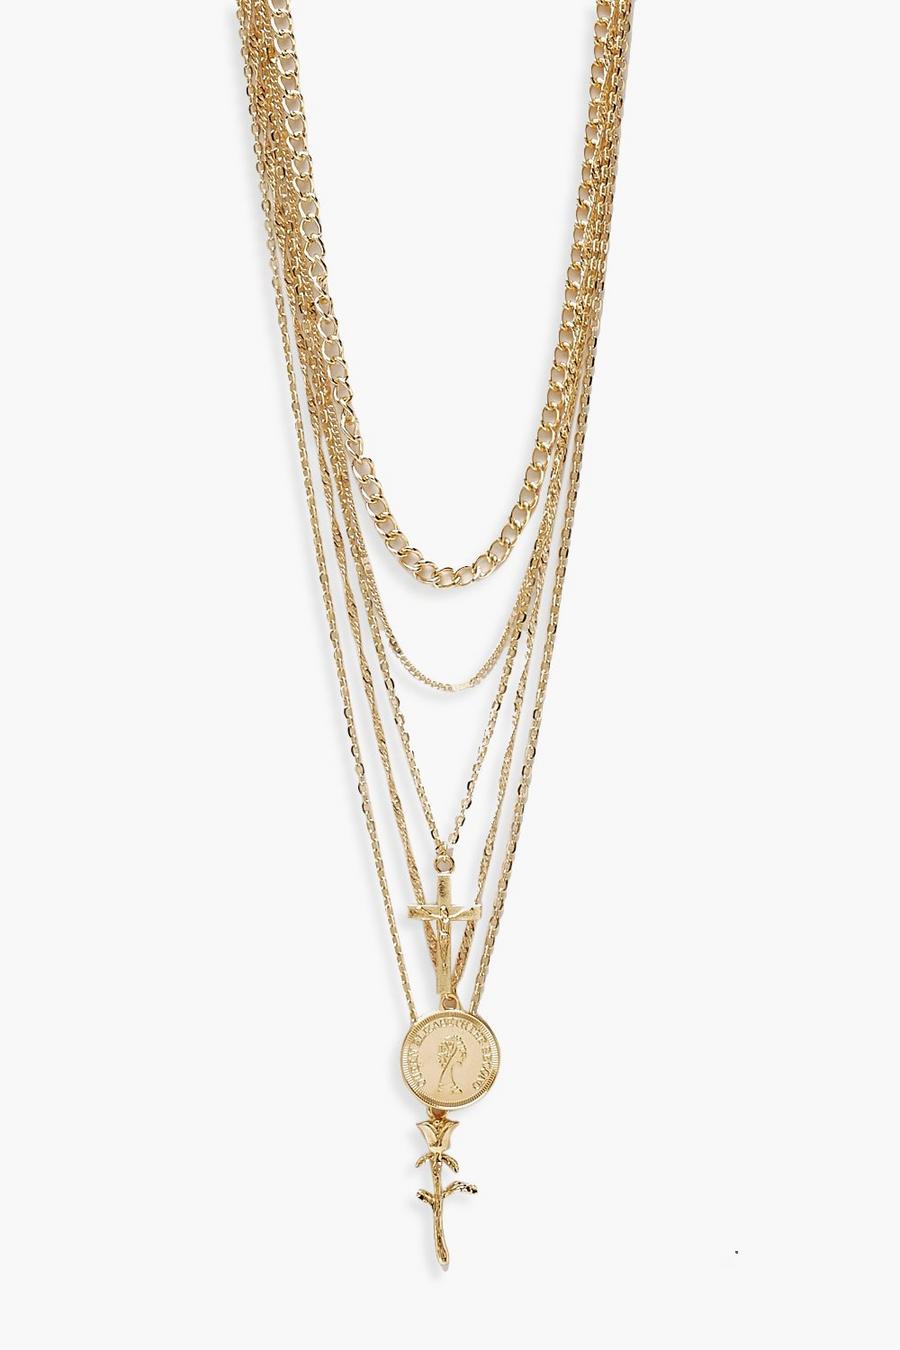 Plus Gold Cross Rose Pendent Chain